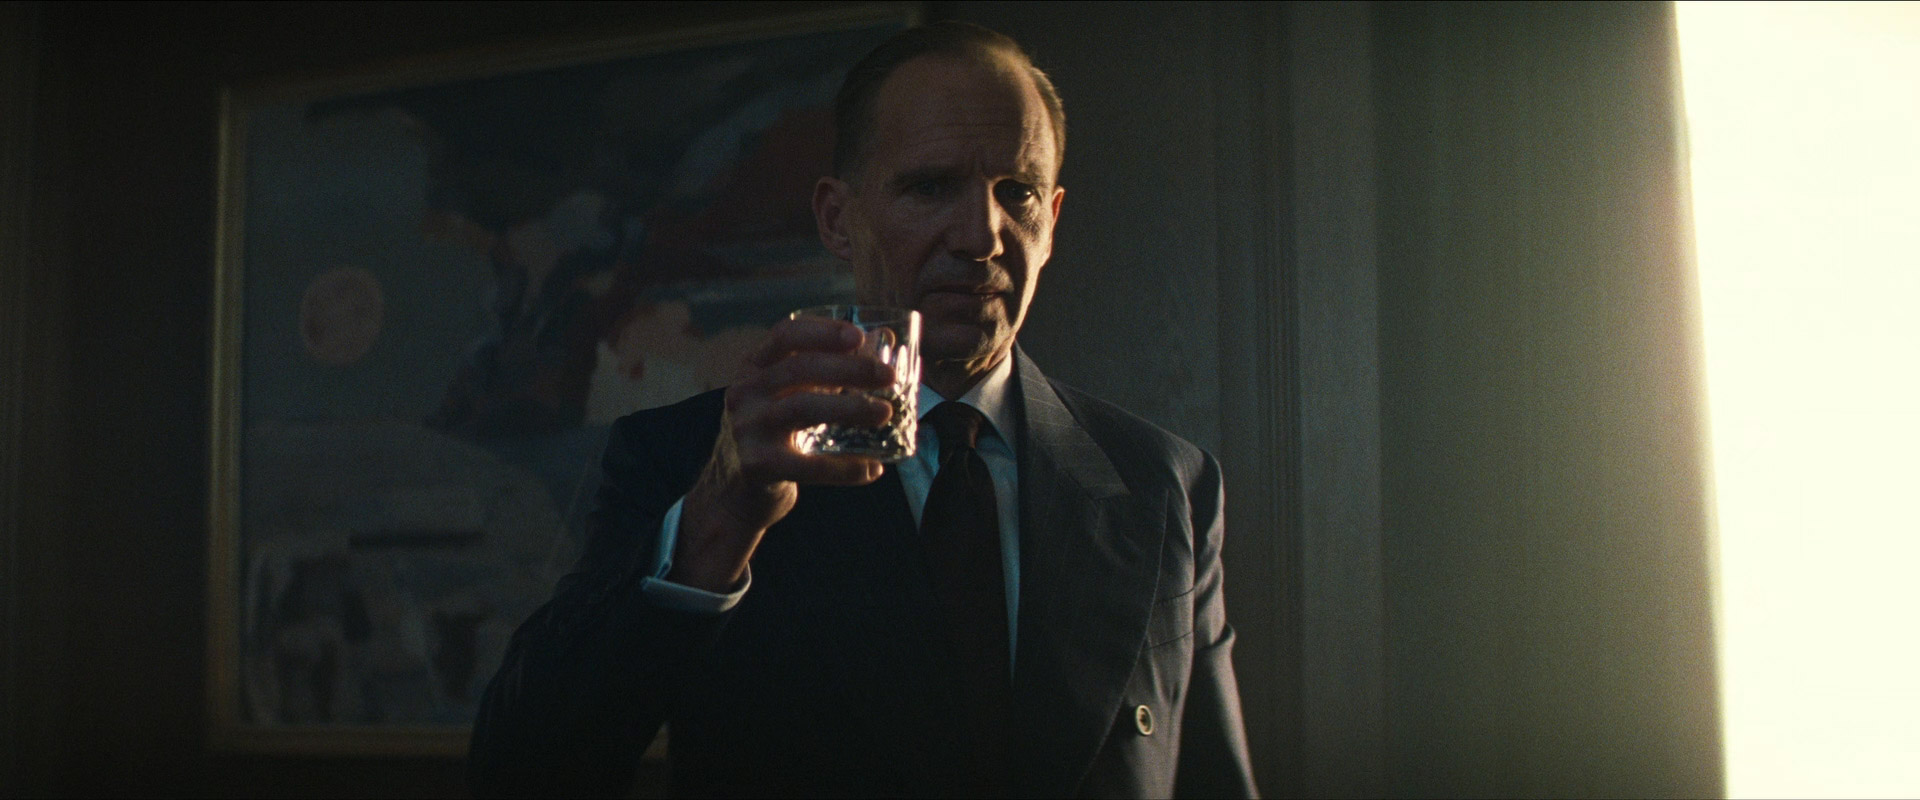 Ralph Fiennes in No Time to Die